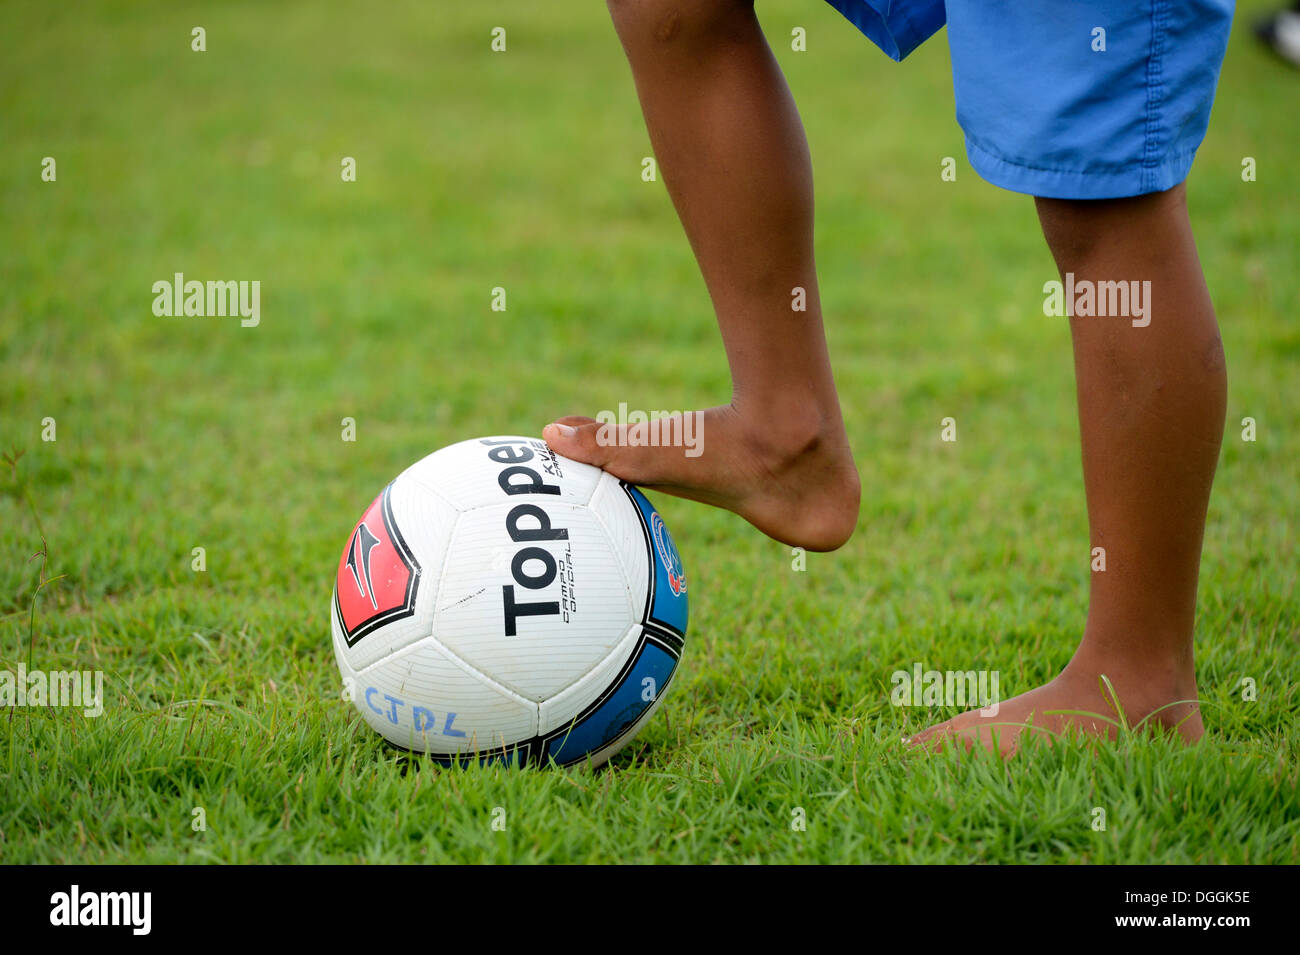 Barefoot boy, one foot on a football, social project in a favela, Poxoréo, Mato Grosso, Brazil Stock Photo